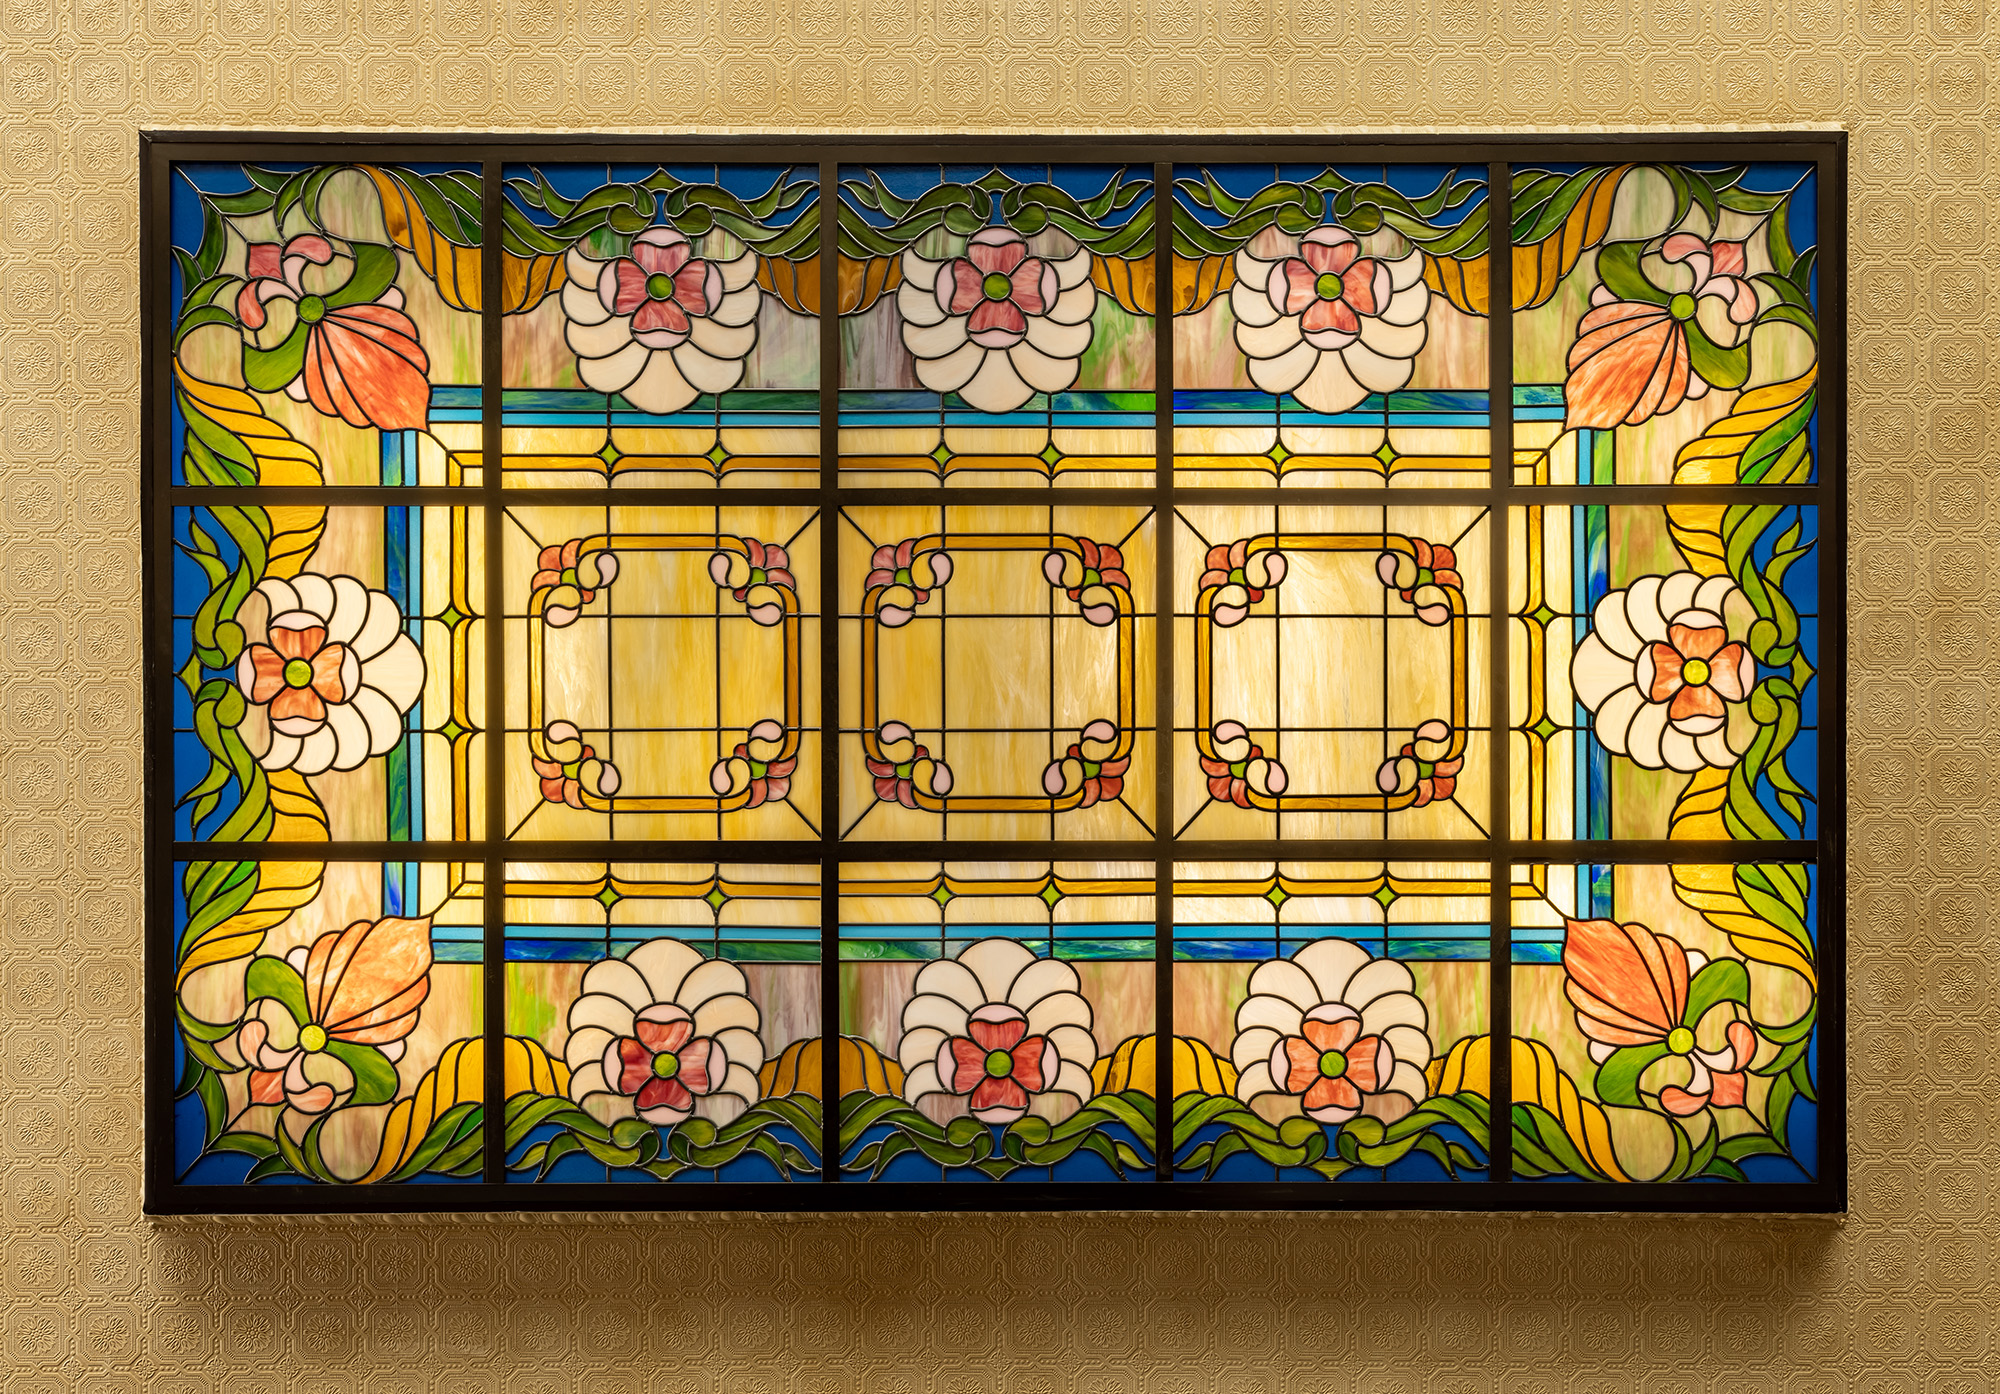 areal view of lit dropped ceiling with stained glass in the art nouveu style. swirly amber glass with pink flowers, blue border